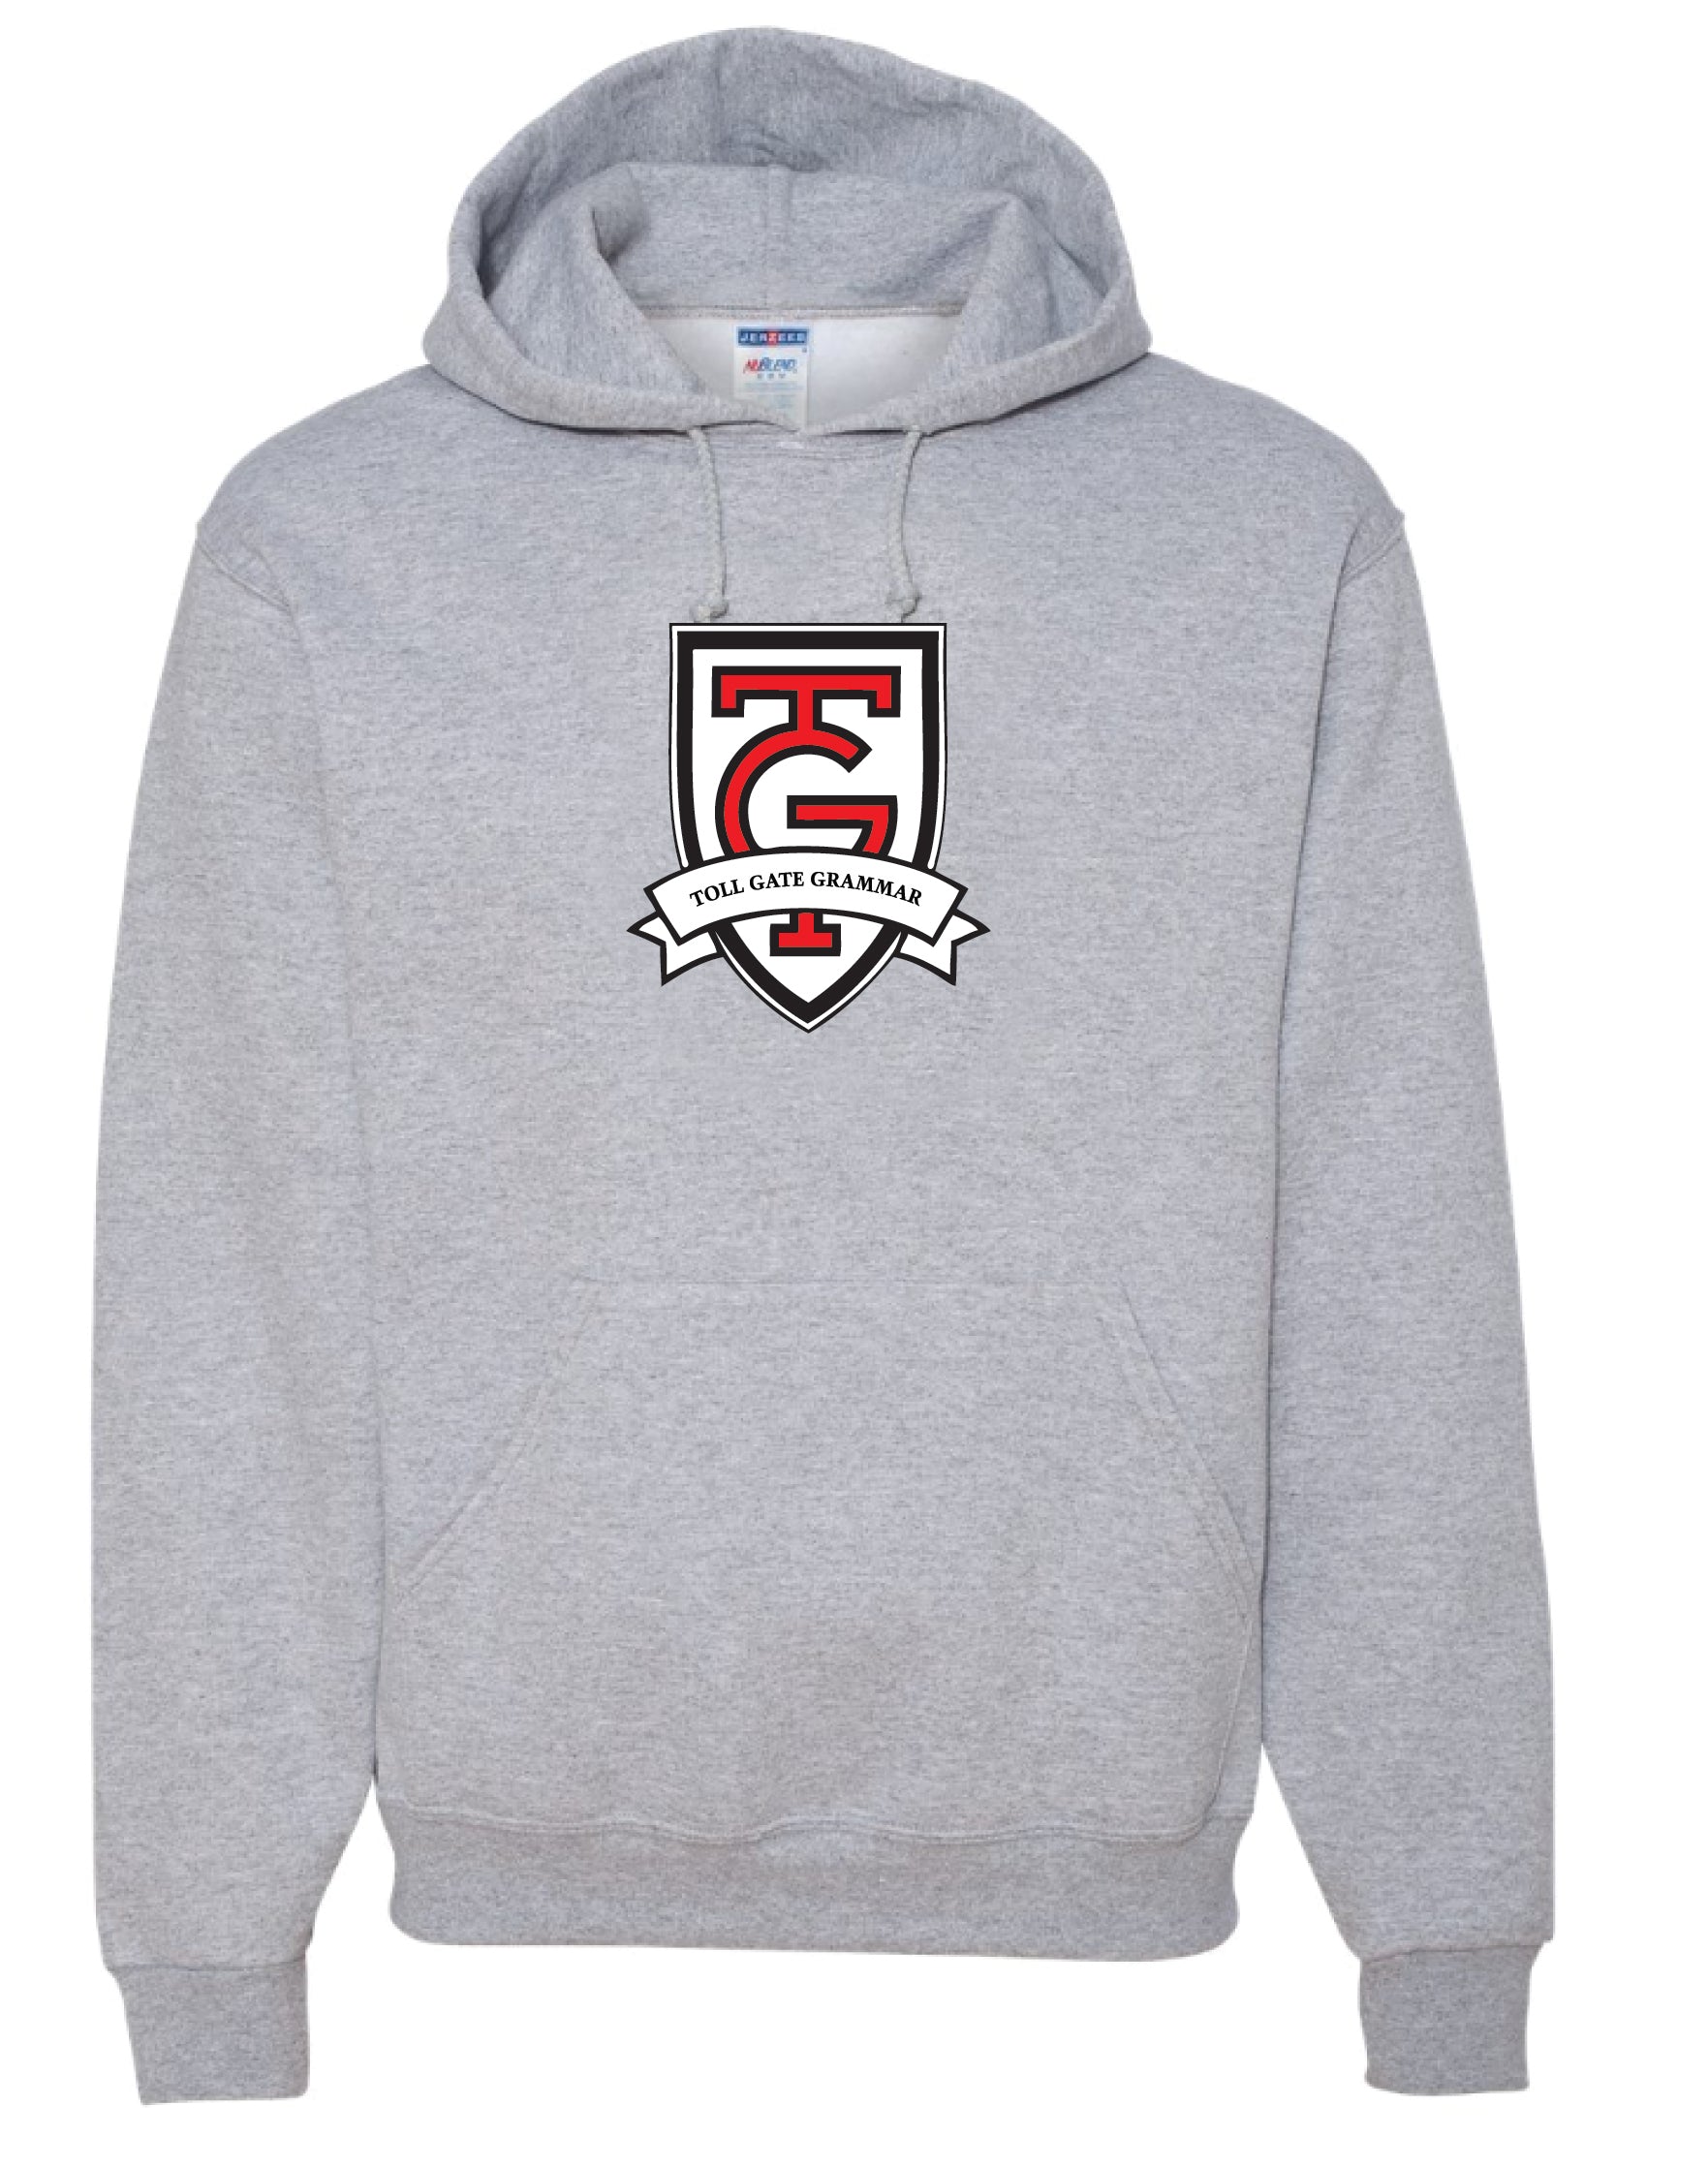 Toll Gate Grey Crest Hoodie - Adult Unisex and Youth